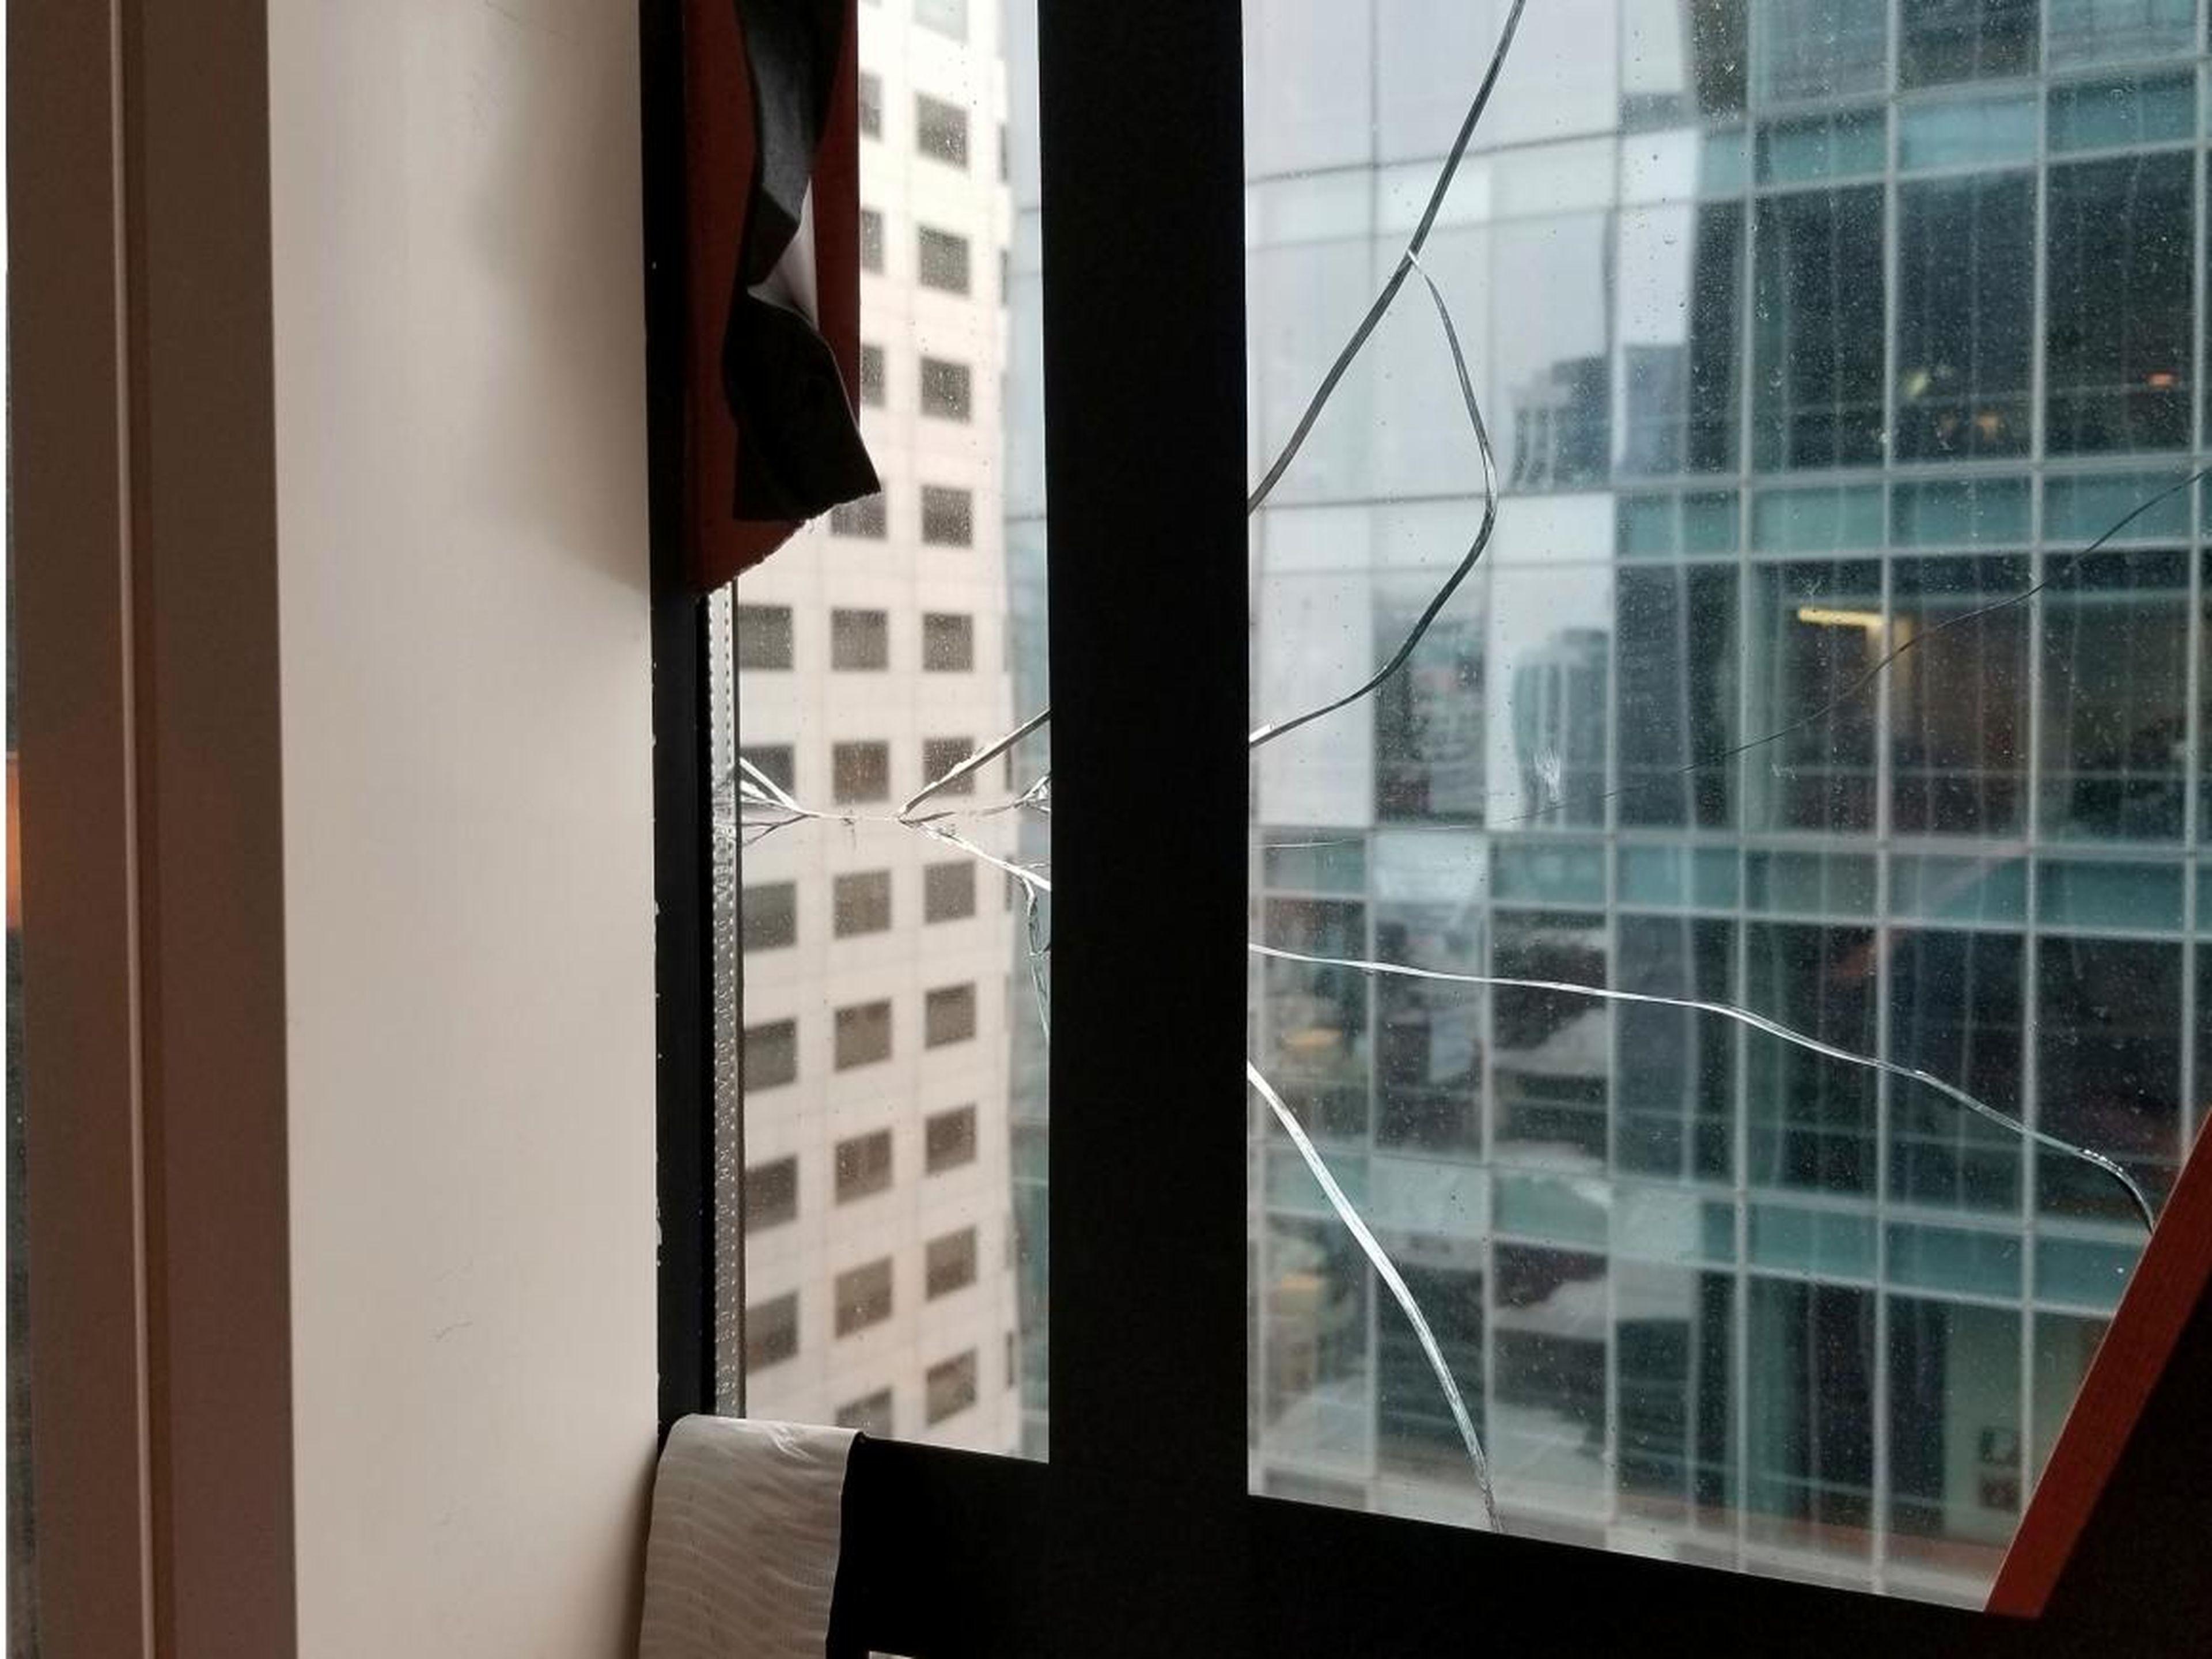 In September, an apartment owner detected a large crack in his window on the high-rise's 36th floor.